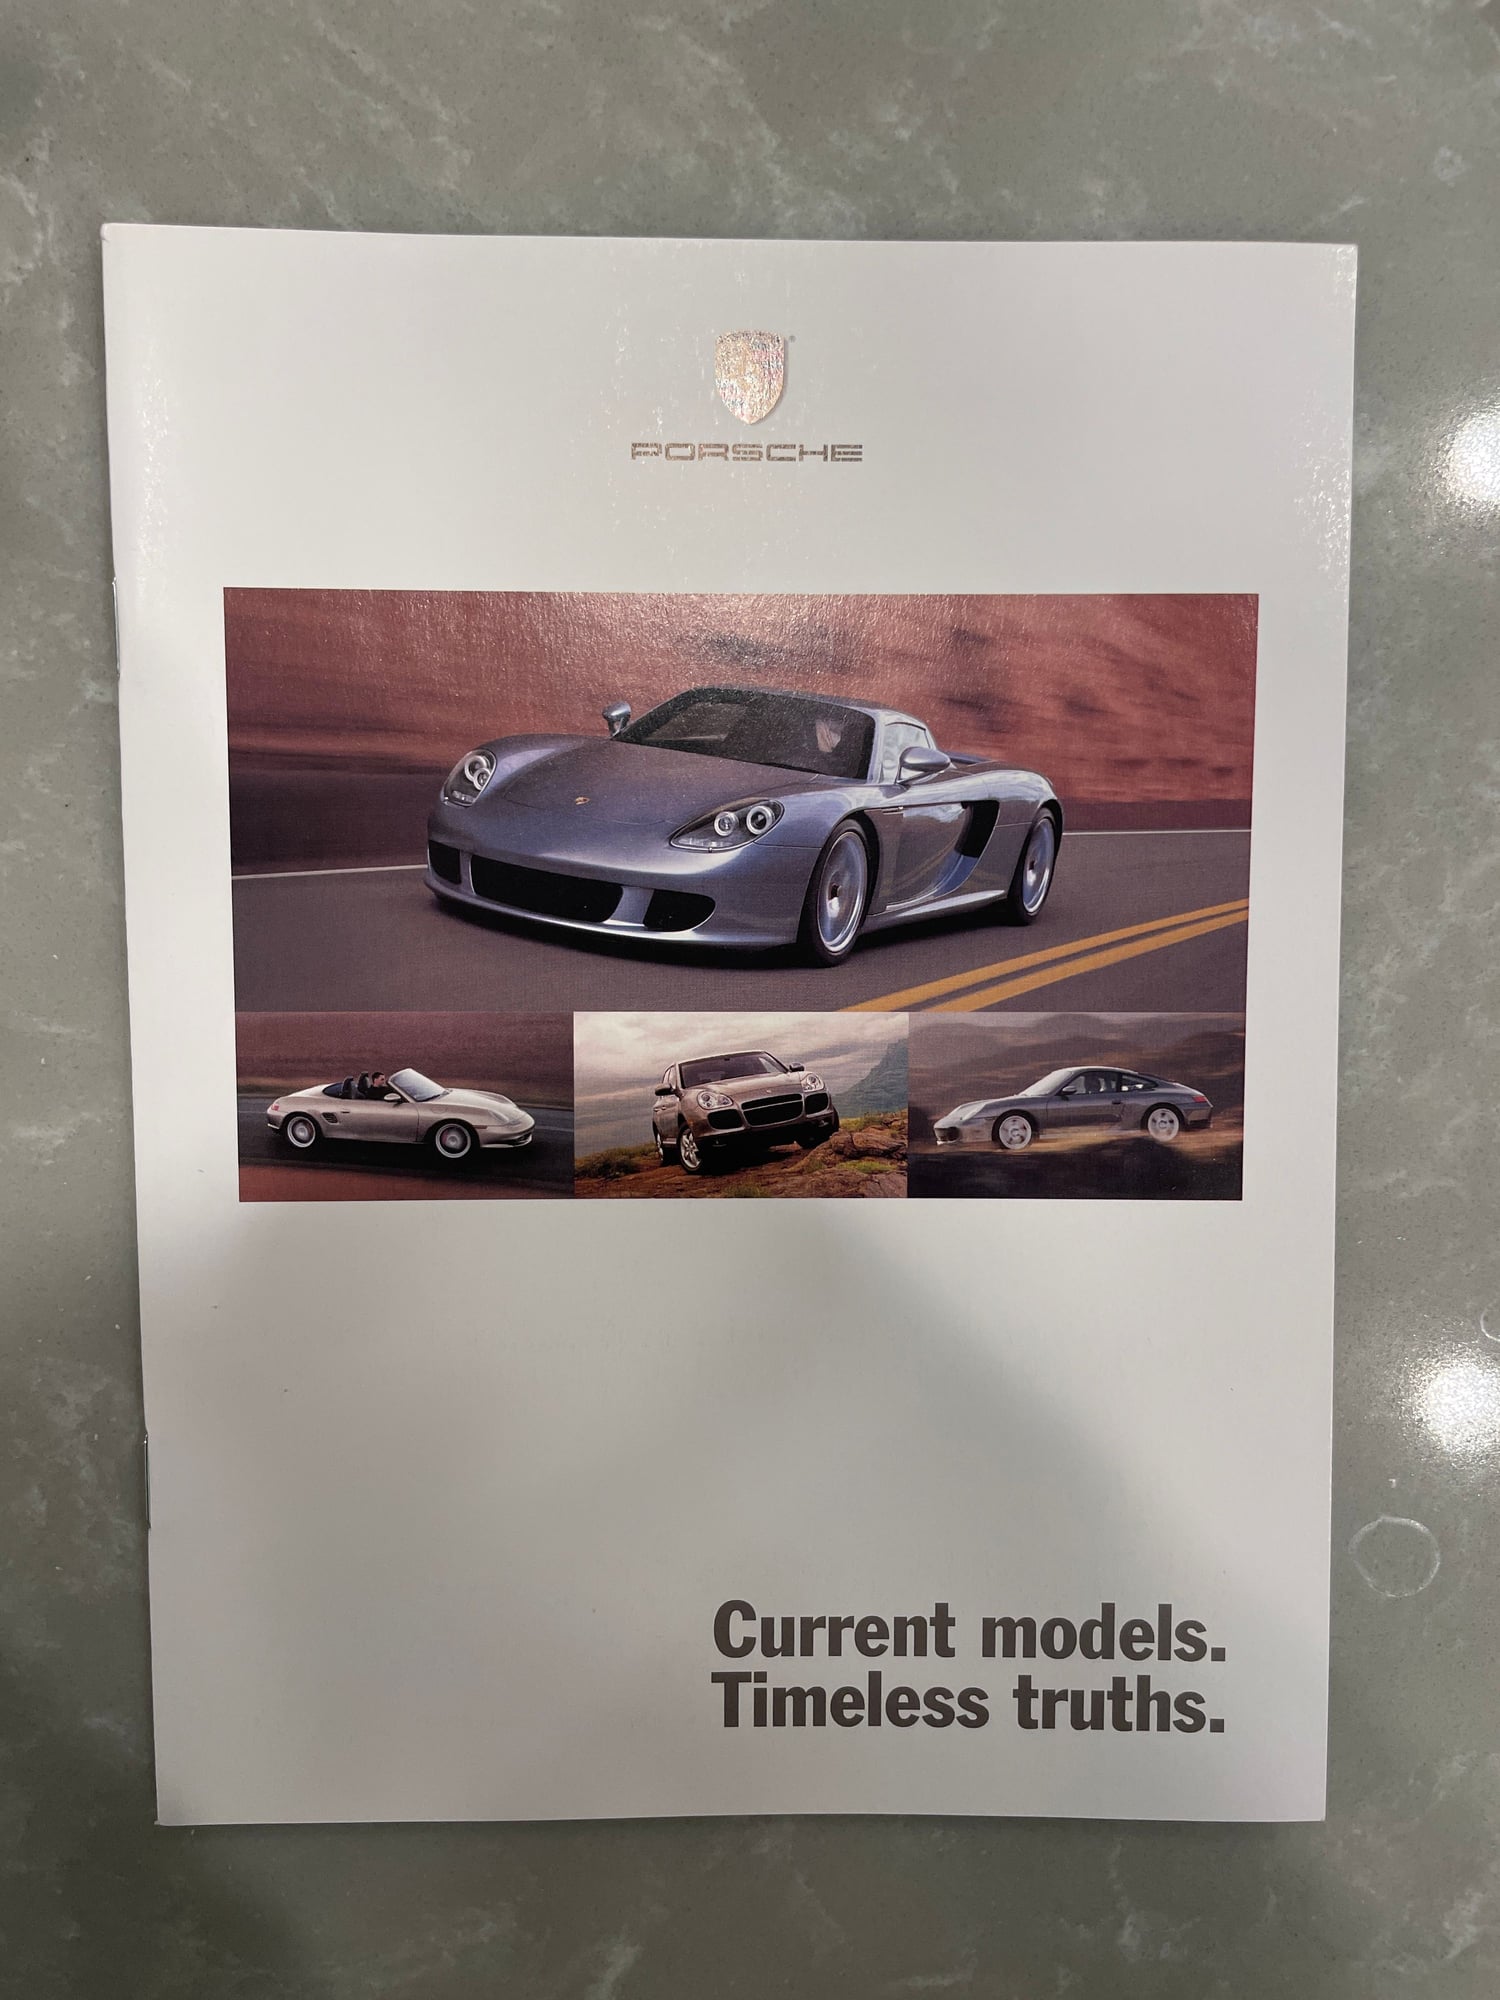 Accessories - 2004 Porsche Current Models Brochure, New Old Stock - New - All Years  All Models - Boston, MA 02116, United States